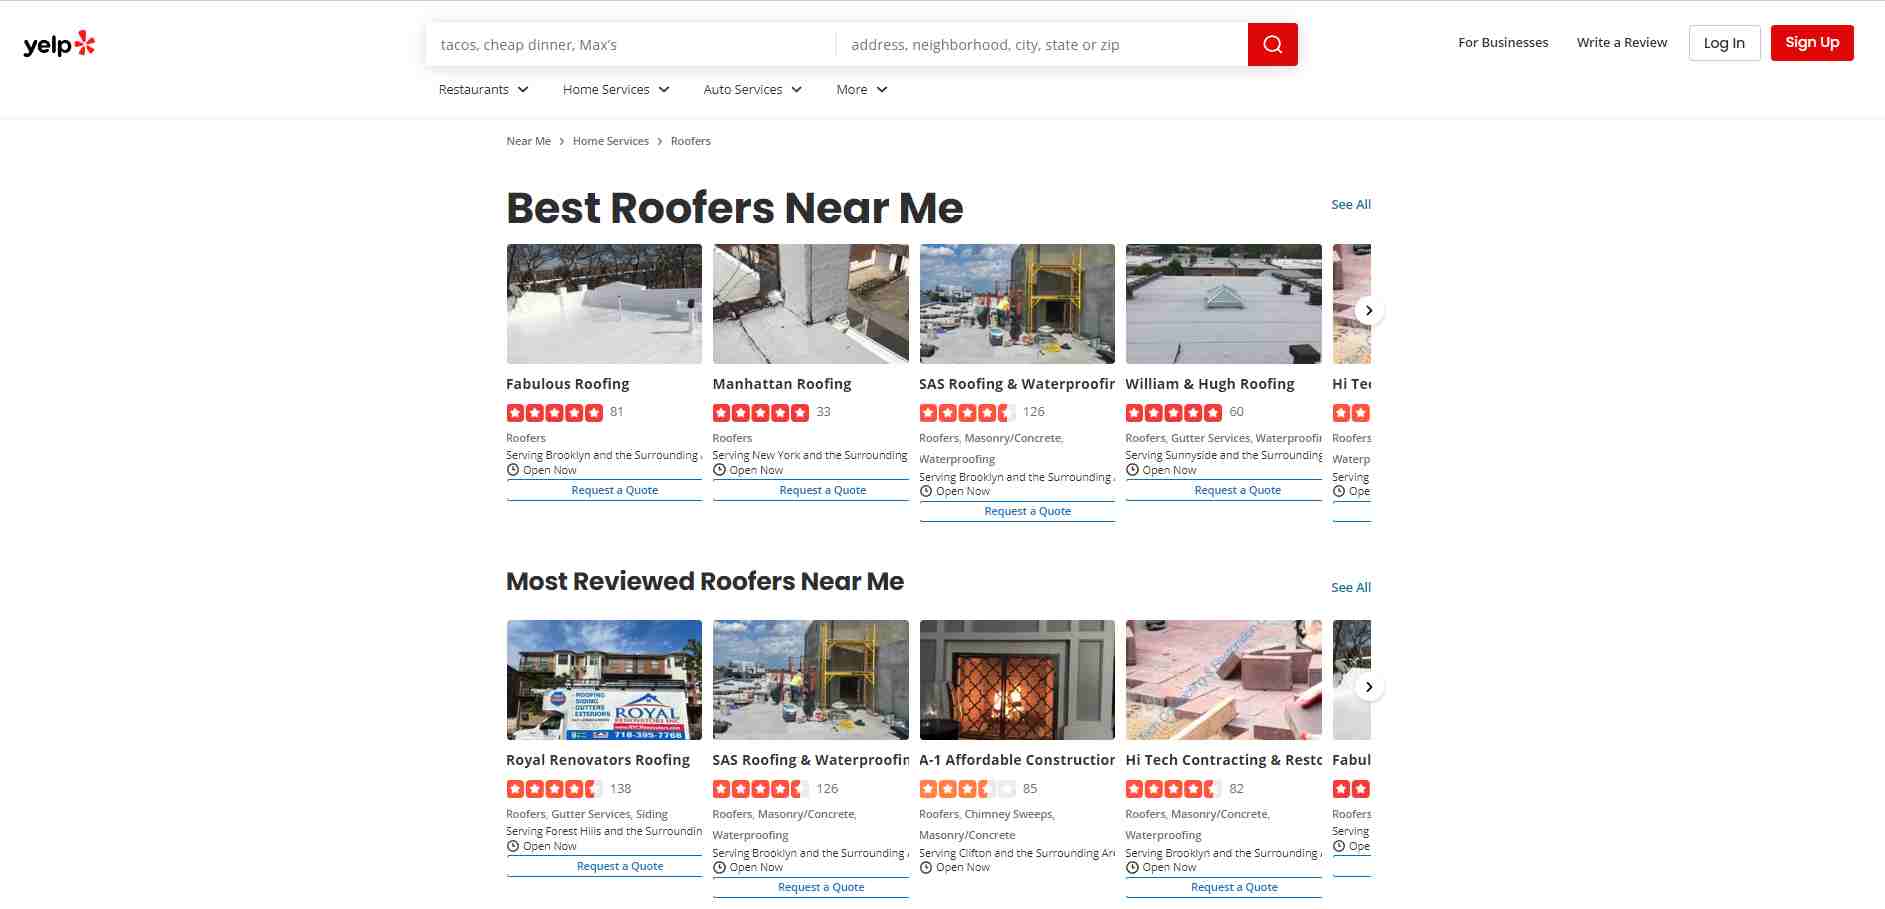 Roofing companies on Yelp